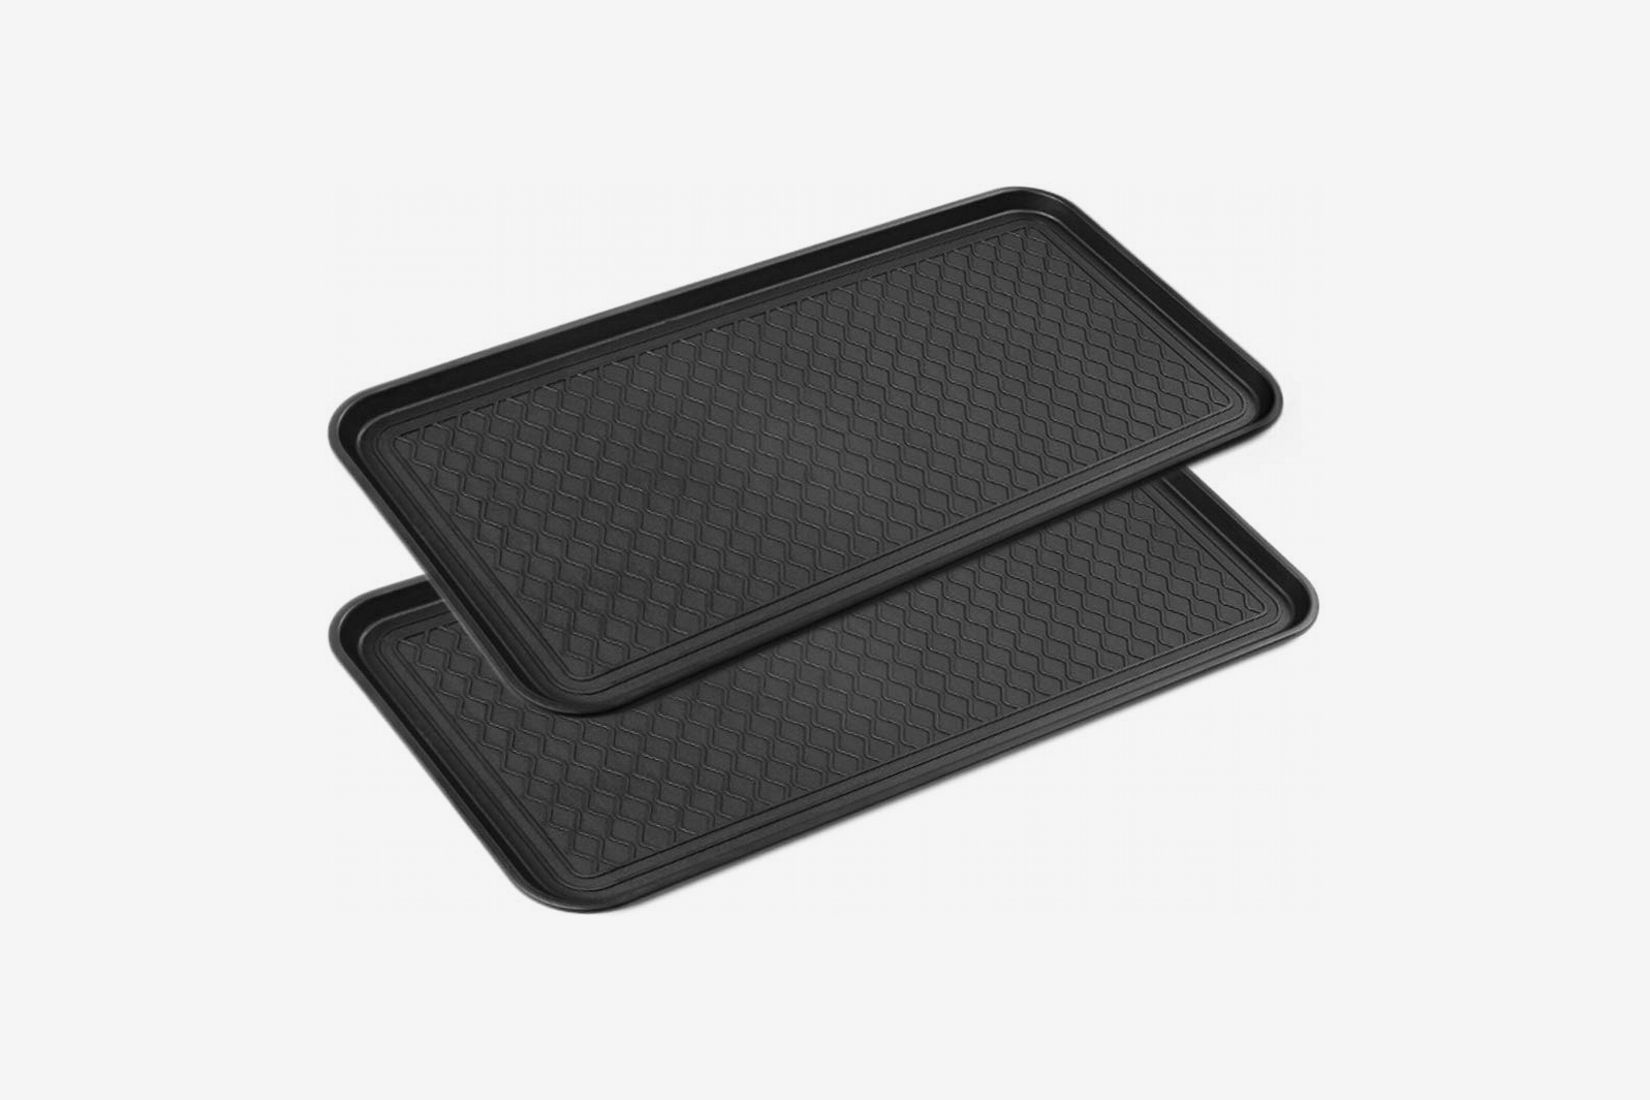 Great Working Tools Boot Trays for Entryway, Set of 2 Heavy Duty Shoe Trays All Season Muddy Mats Wet Shoe Tray Snow Boot Tray - Brown, 23.75 x